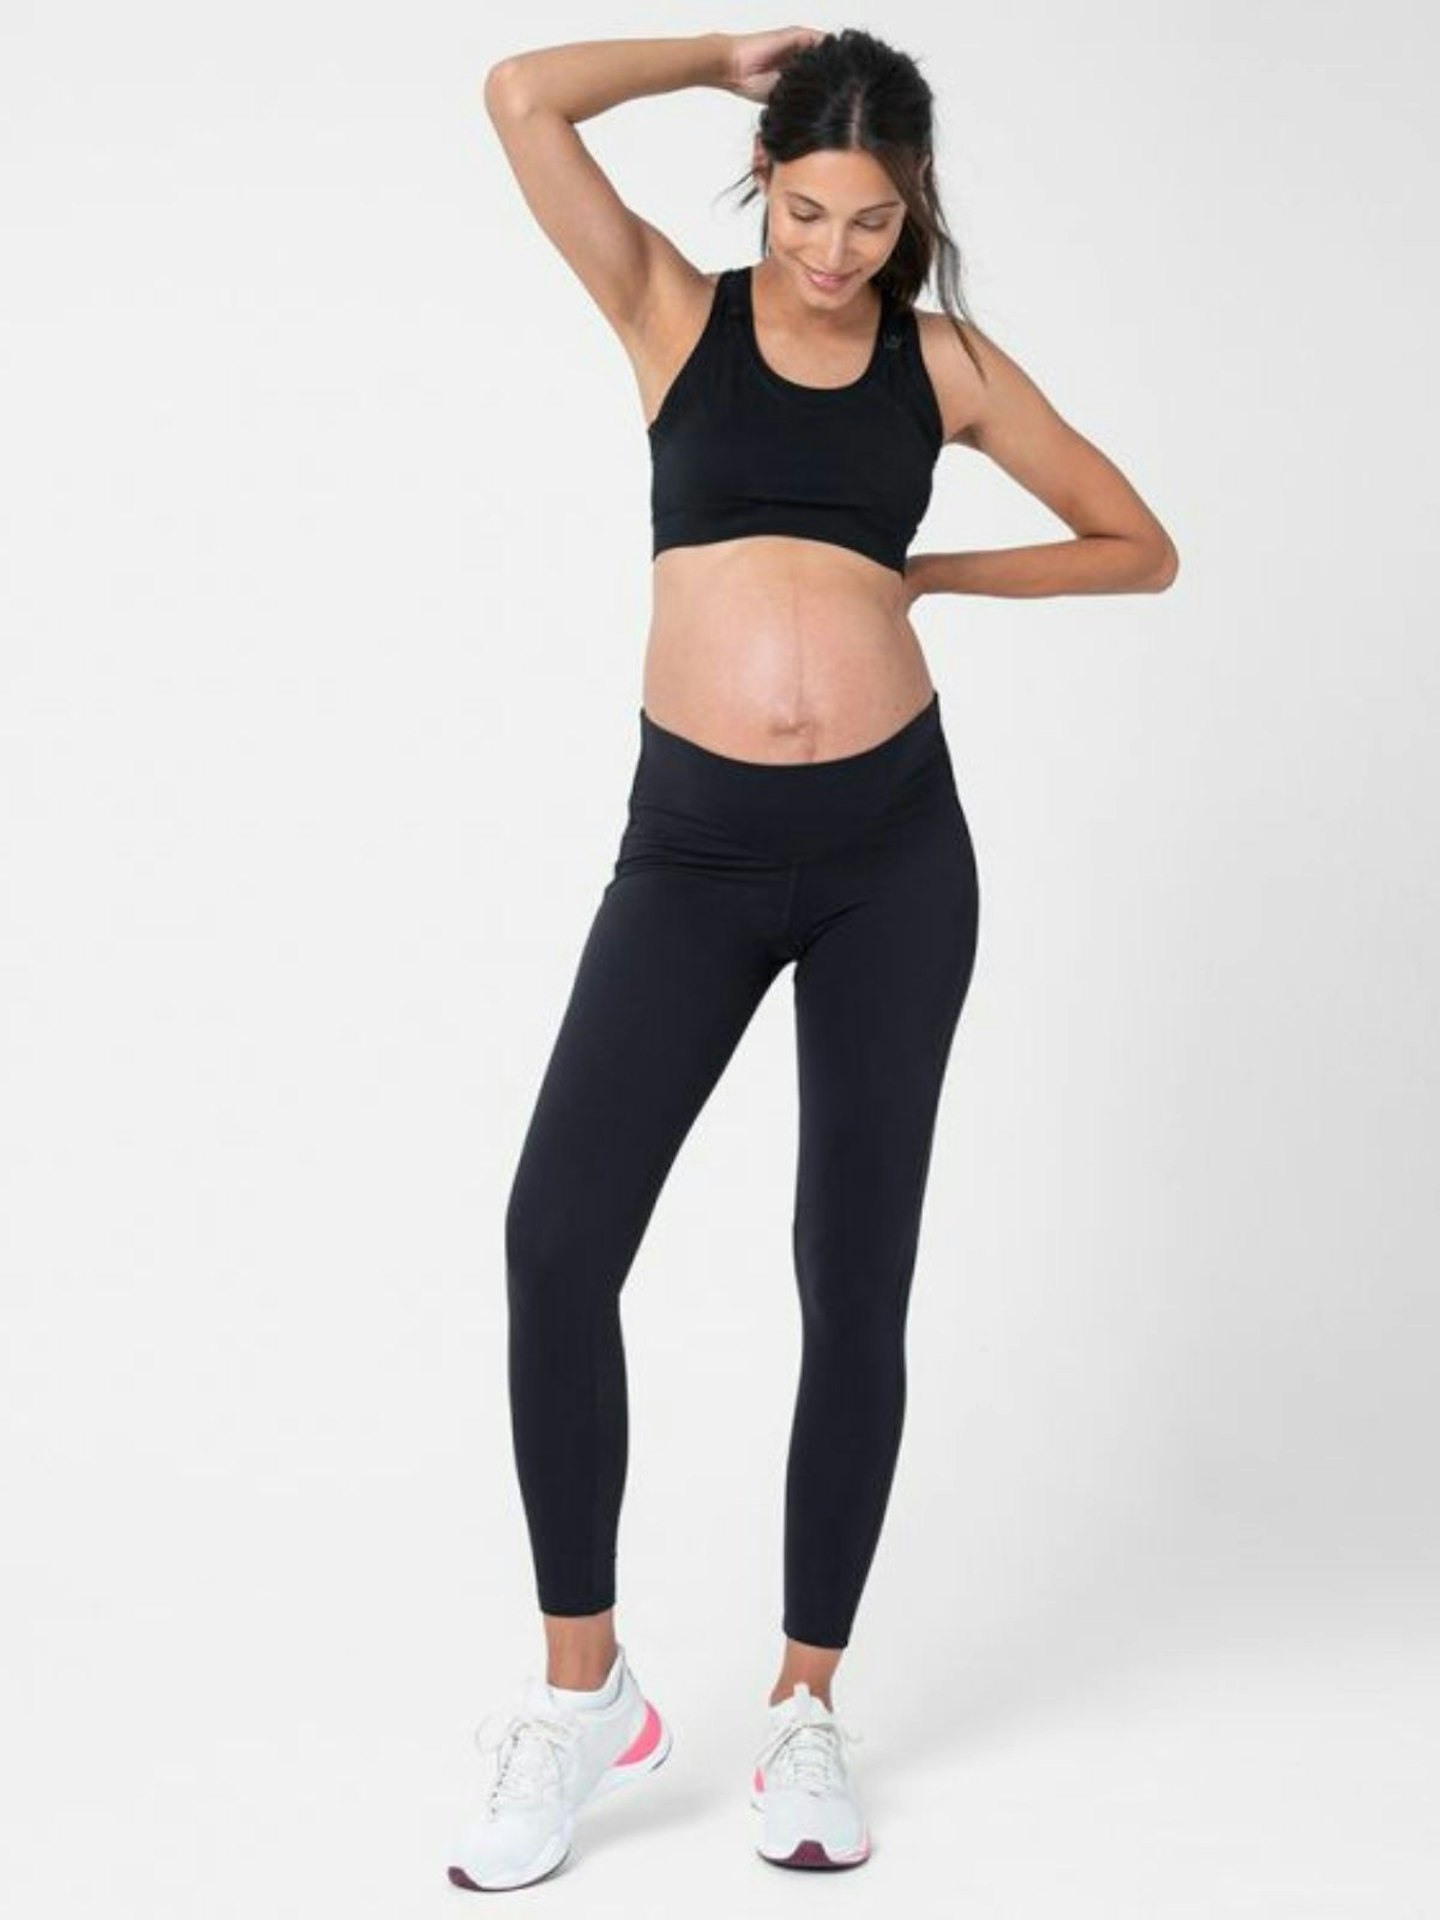 I'm a WH Editor and these Maternity Leggings are the only gym kit